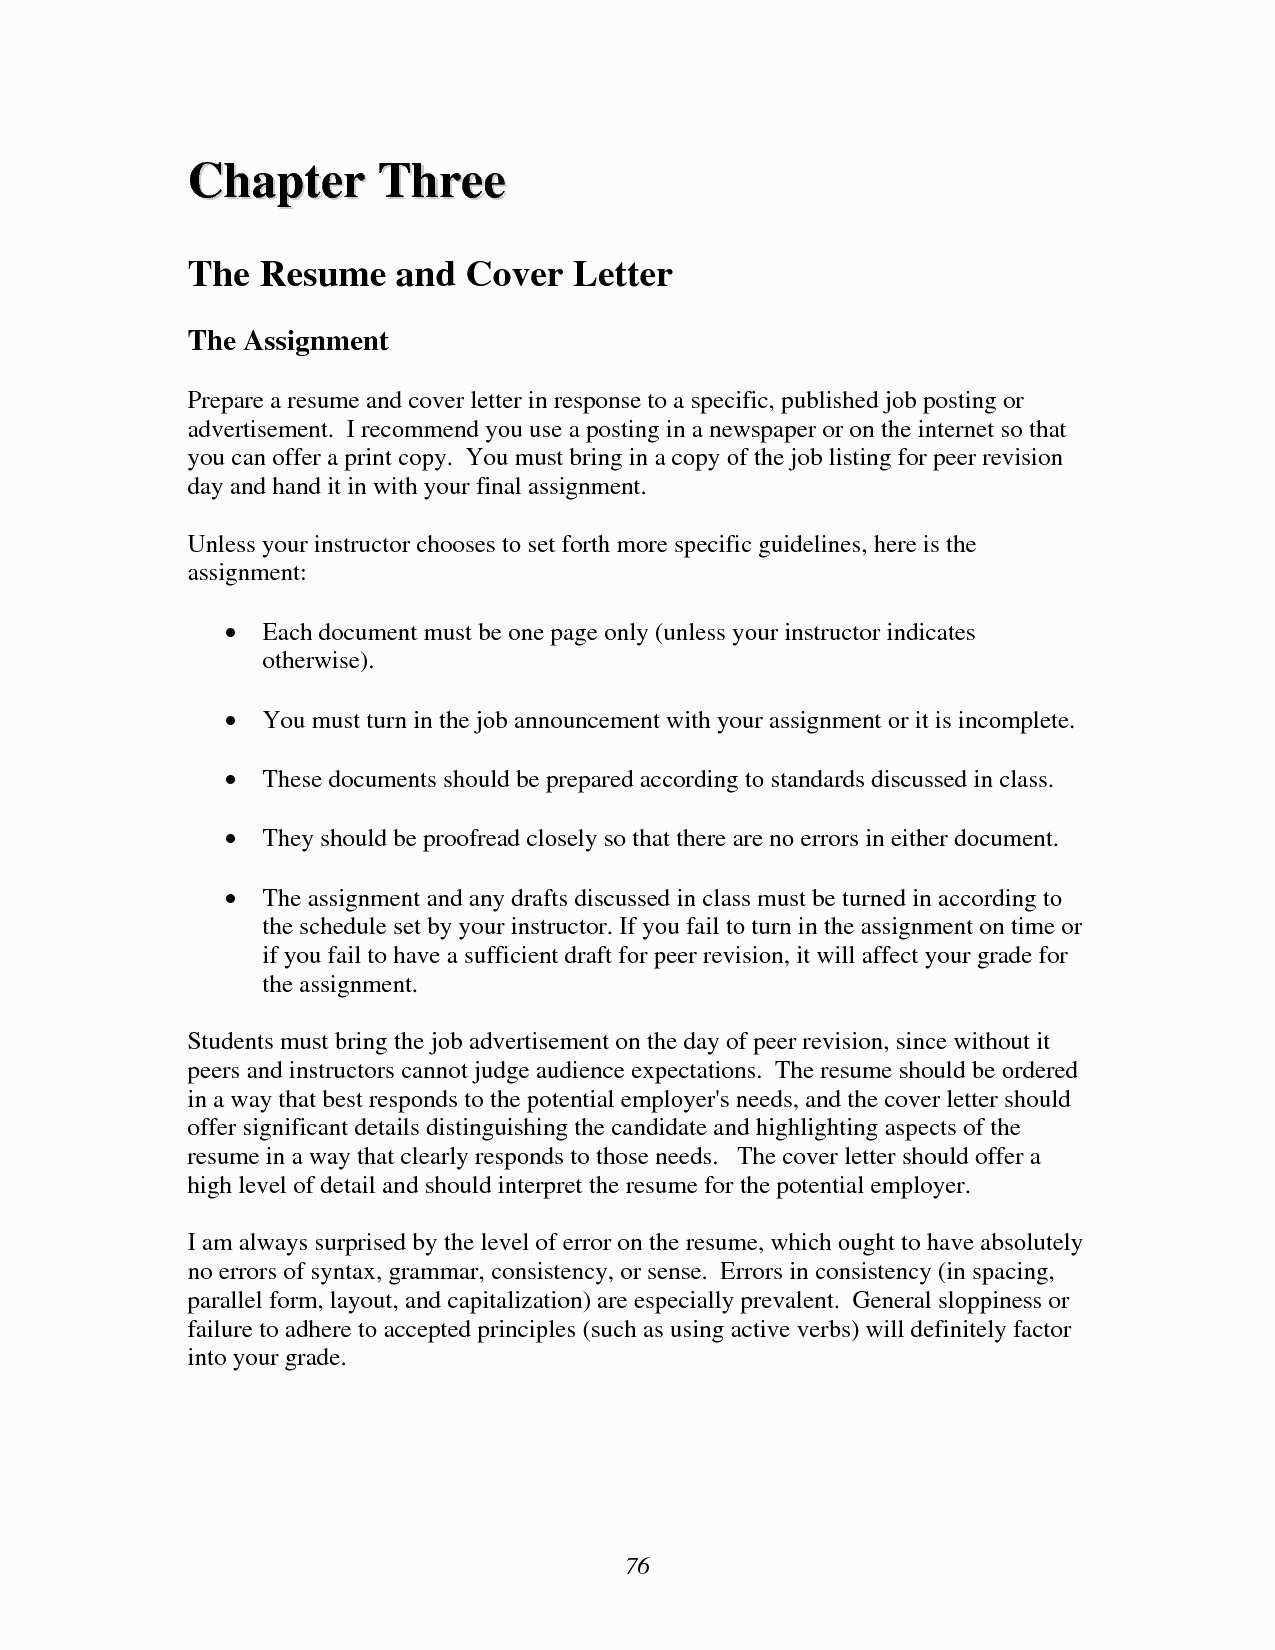 Sample Employment Offer Letter Template - Cpt Job Fer Letter Sample Valid Job Fer Letter Template Us Copy Od